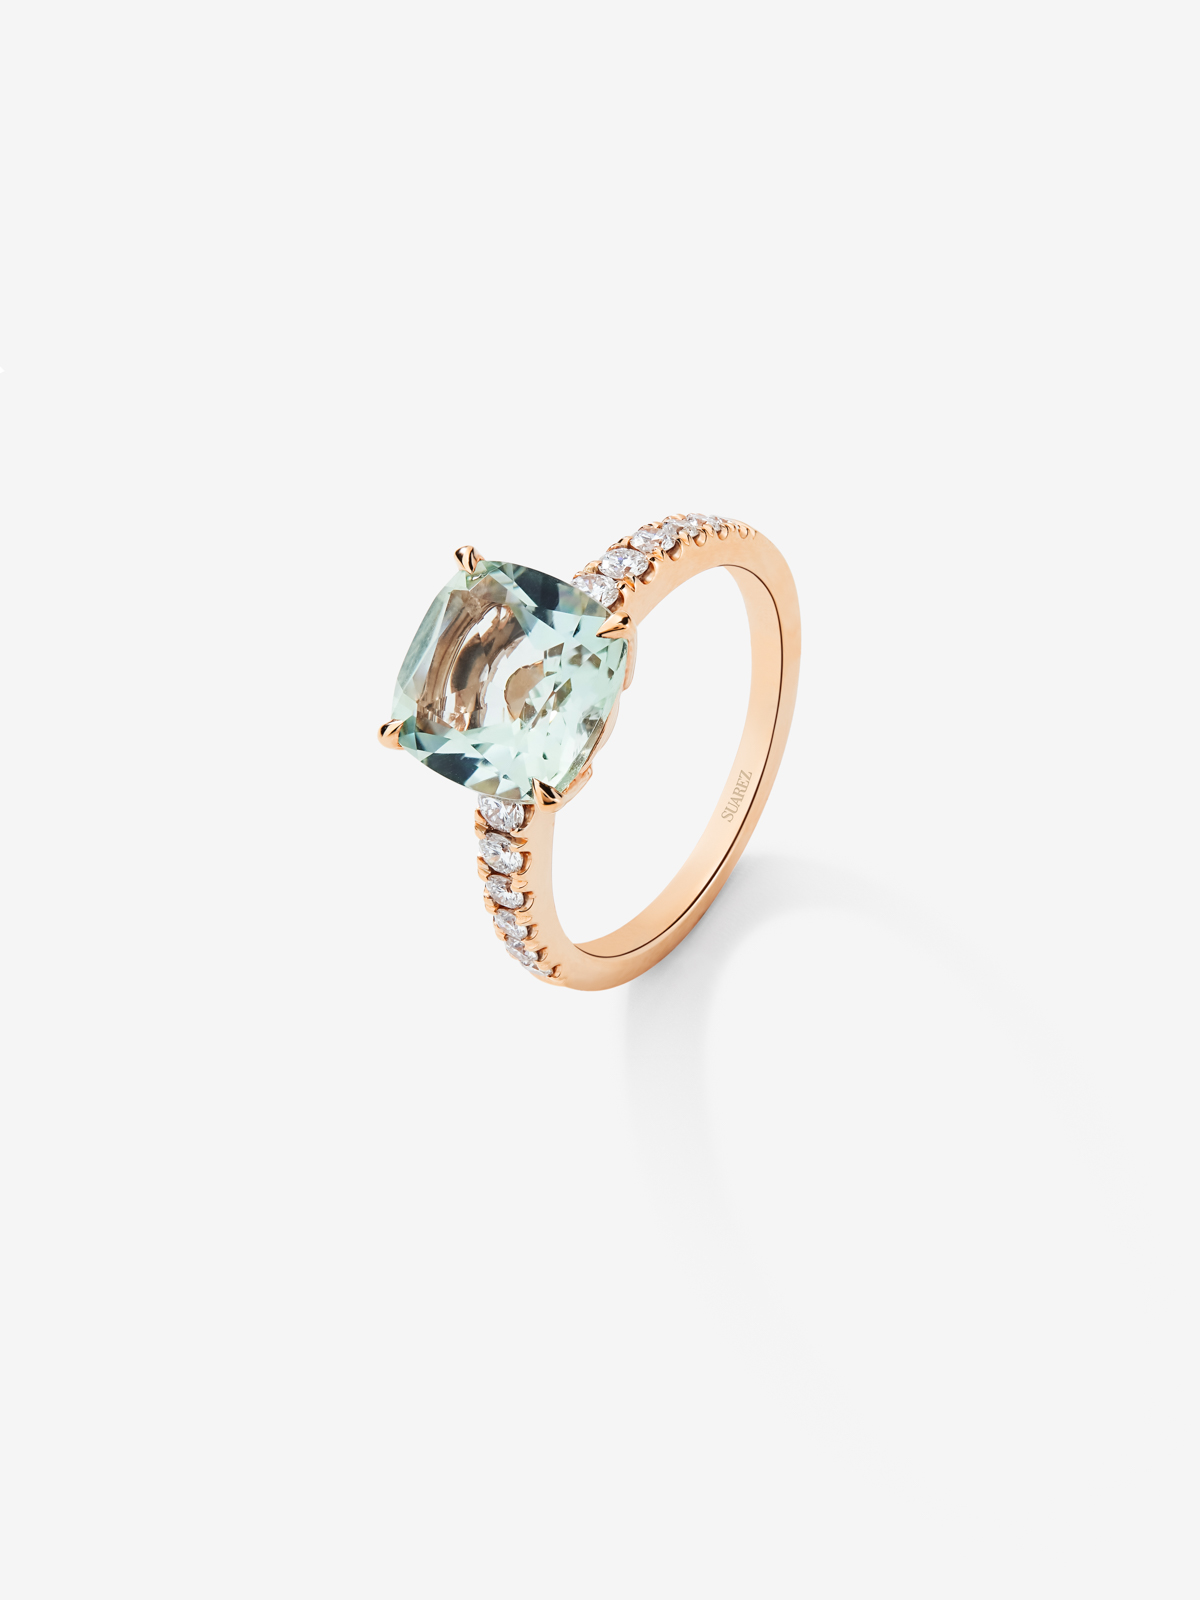 18K rose gold solitaire ring with green amethyst and diamond.